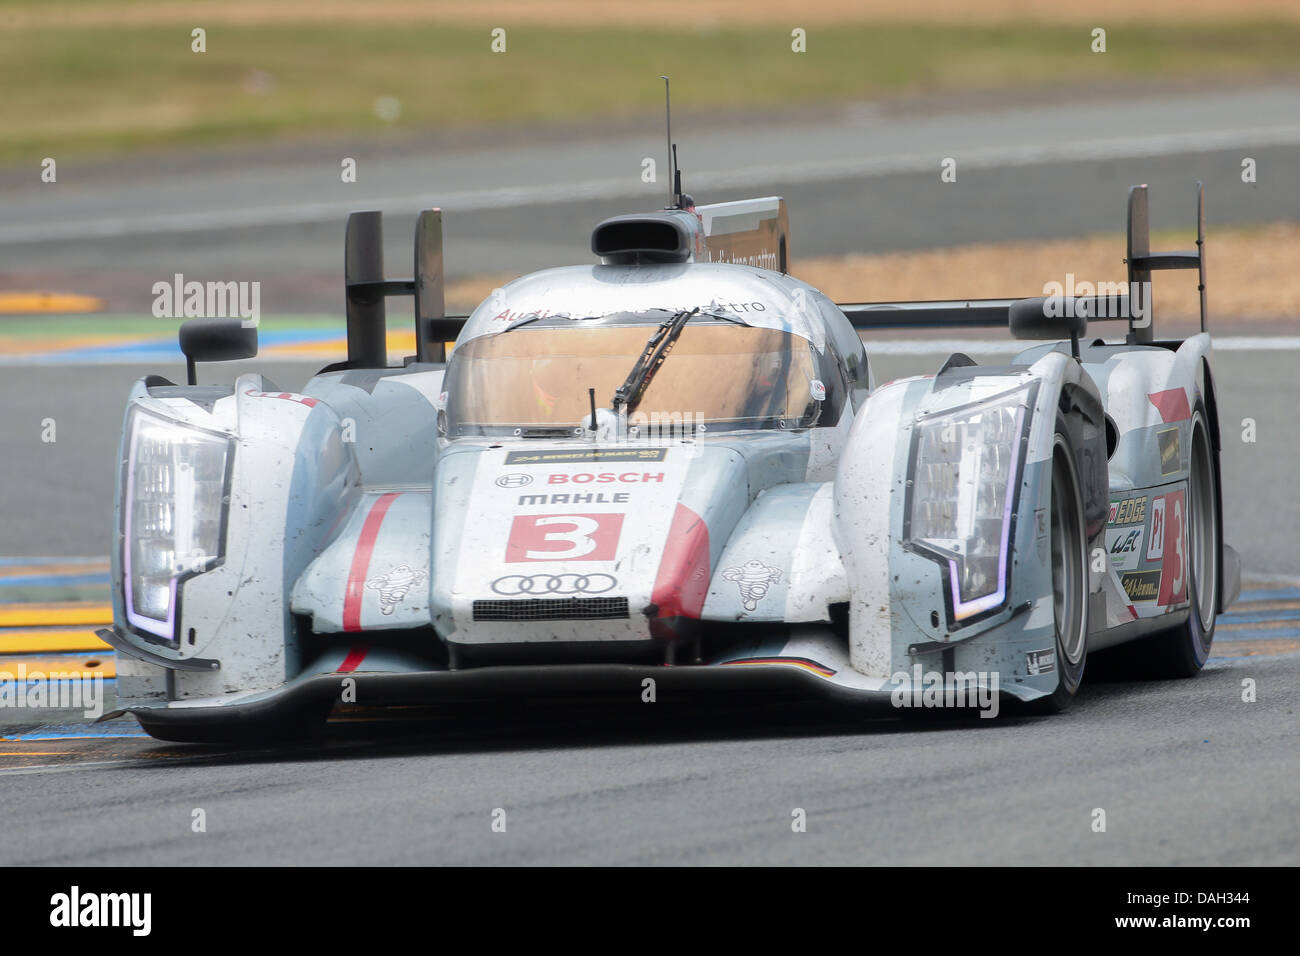 LE MANS, FRANCE - JUNE 23 Audi #3 competes in the 24 hours of Le Mans 2013 Stock Photo